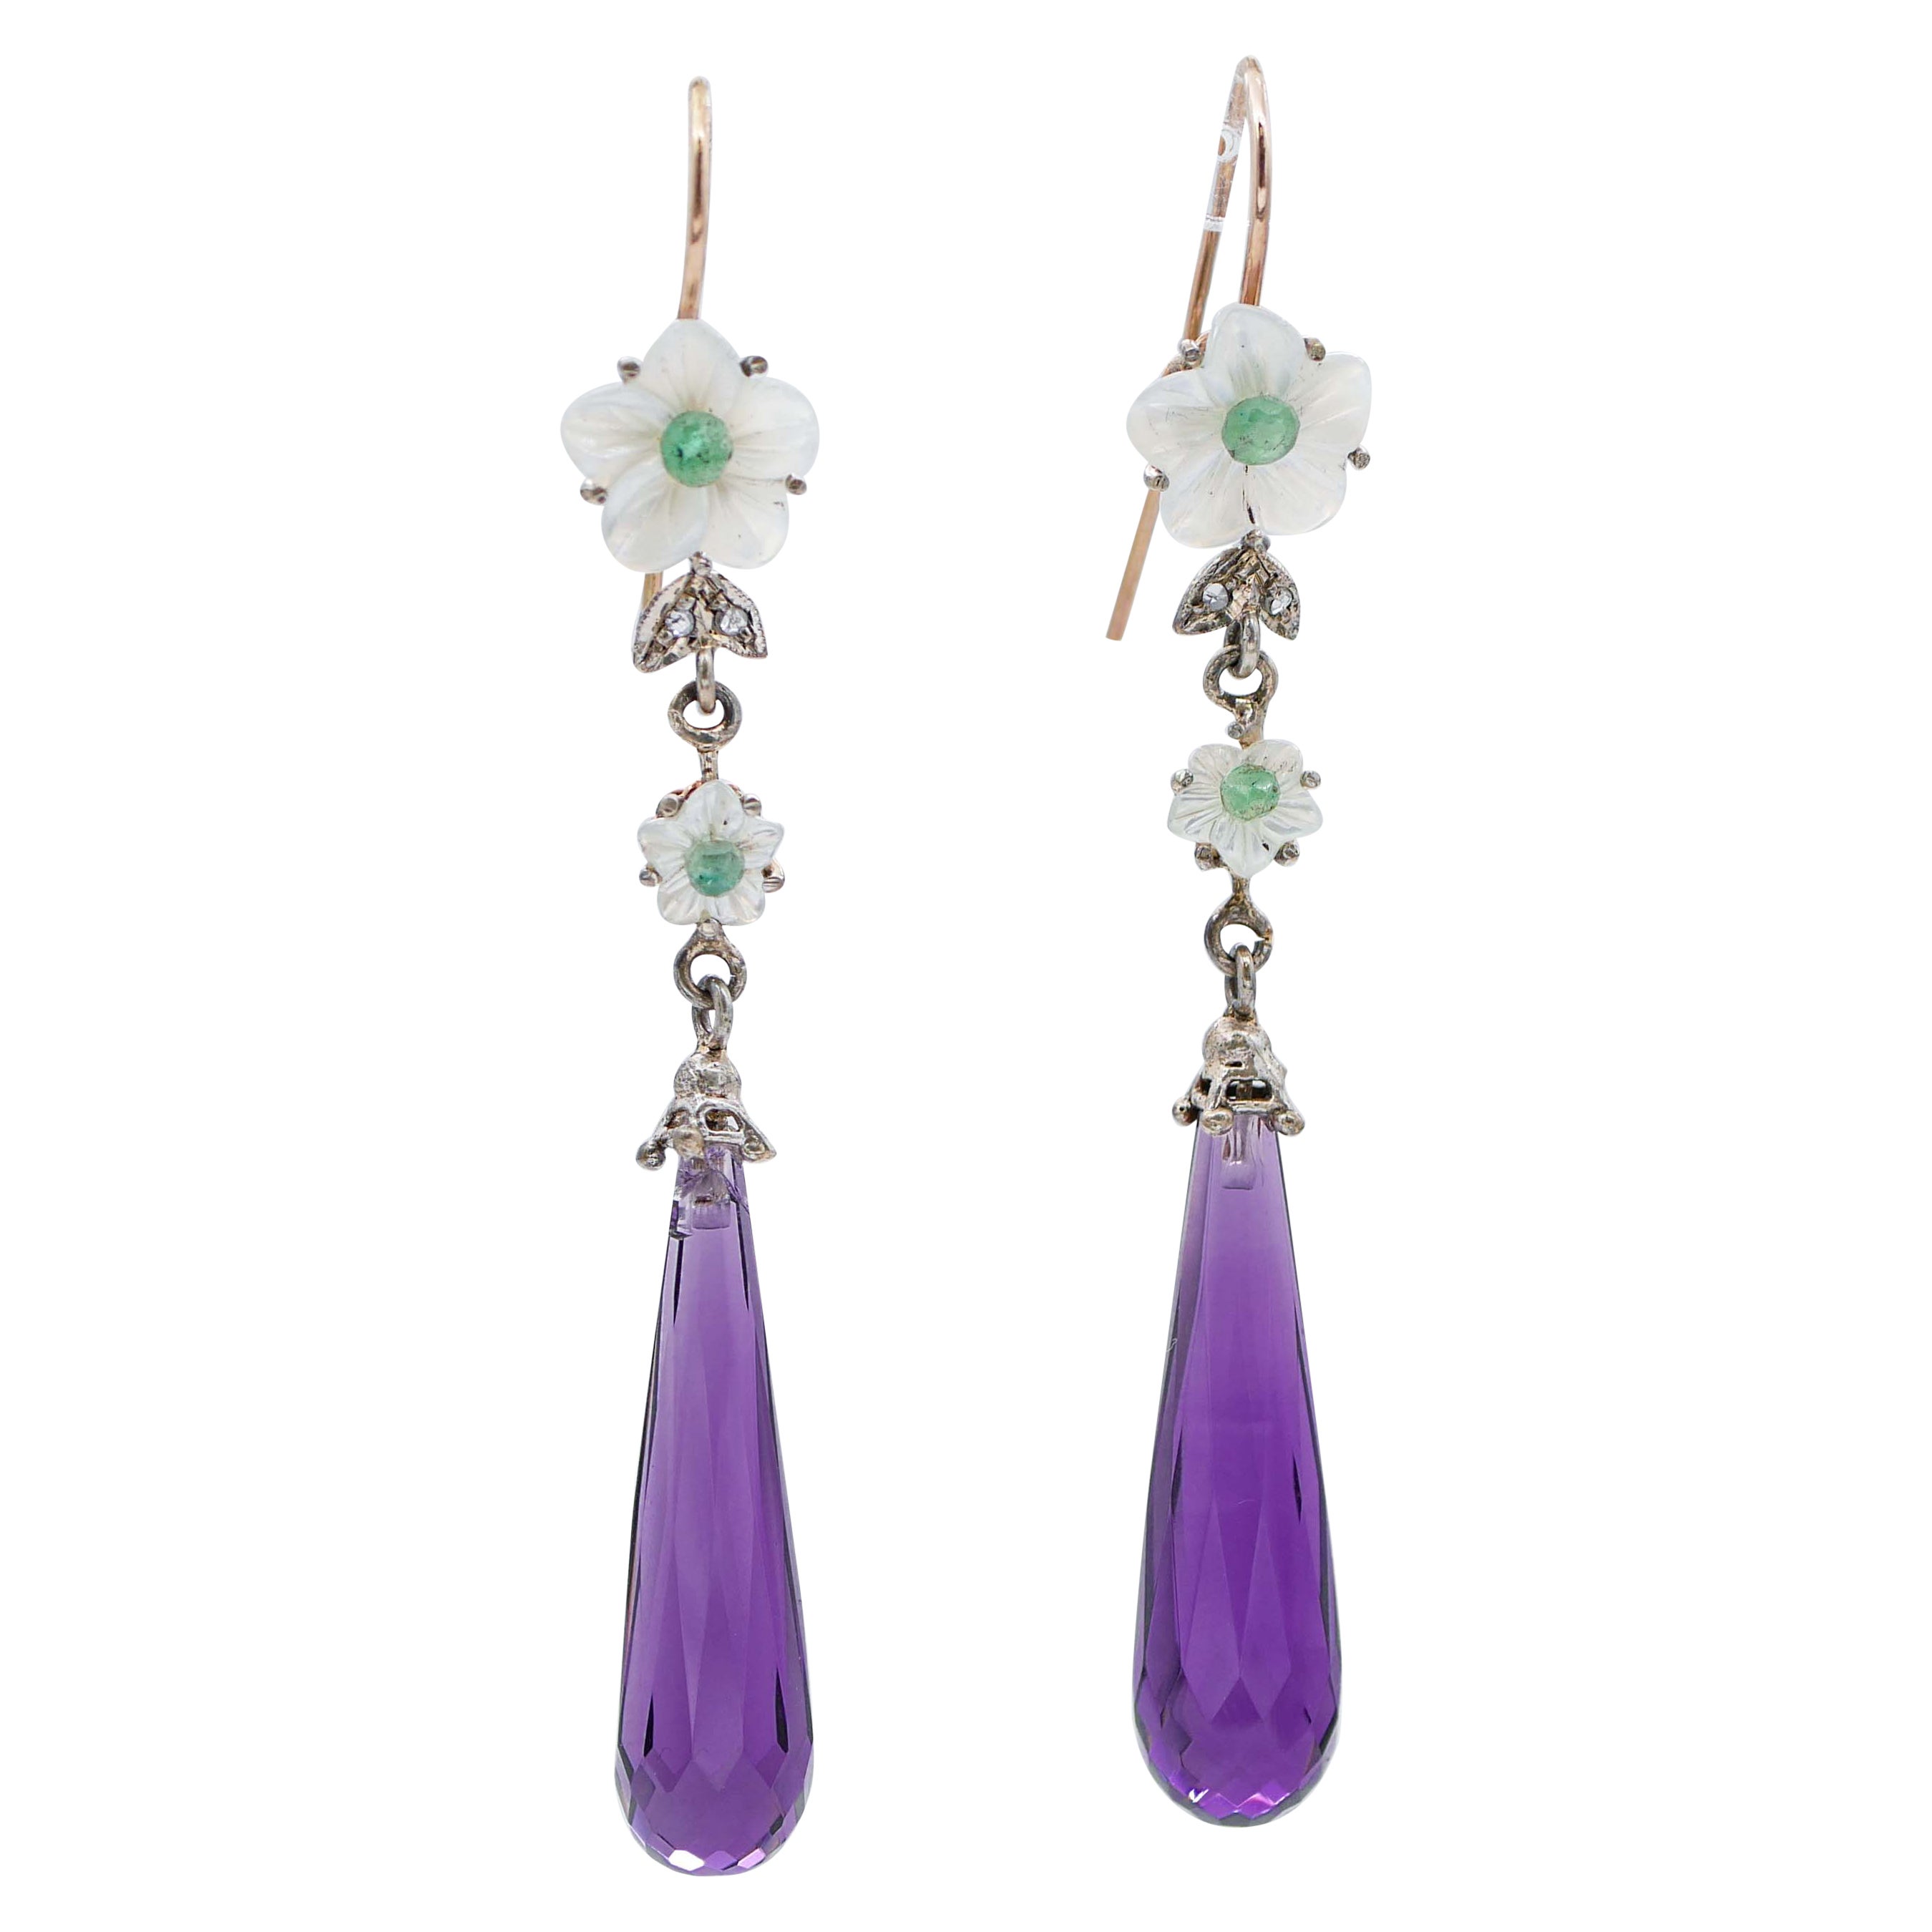 Amethysts, Emeralds, Diamonds, White Stones, Rose Gold and Silver Earrings